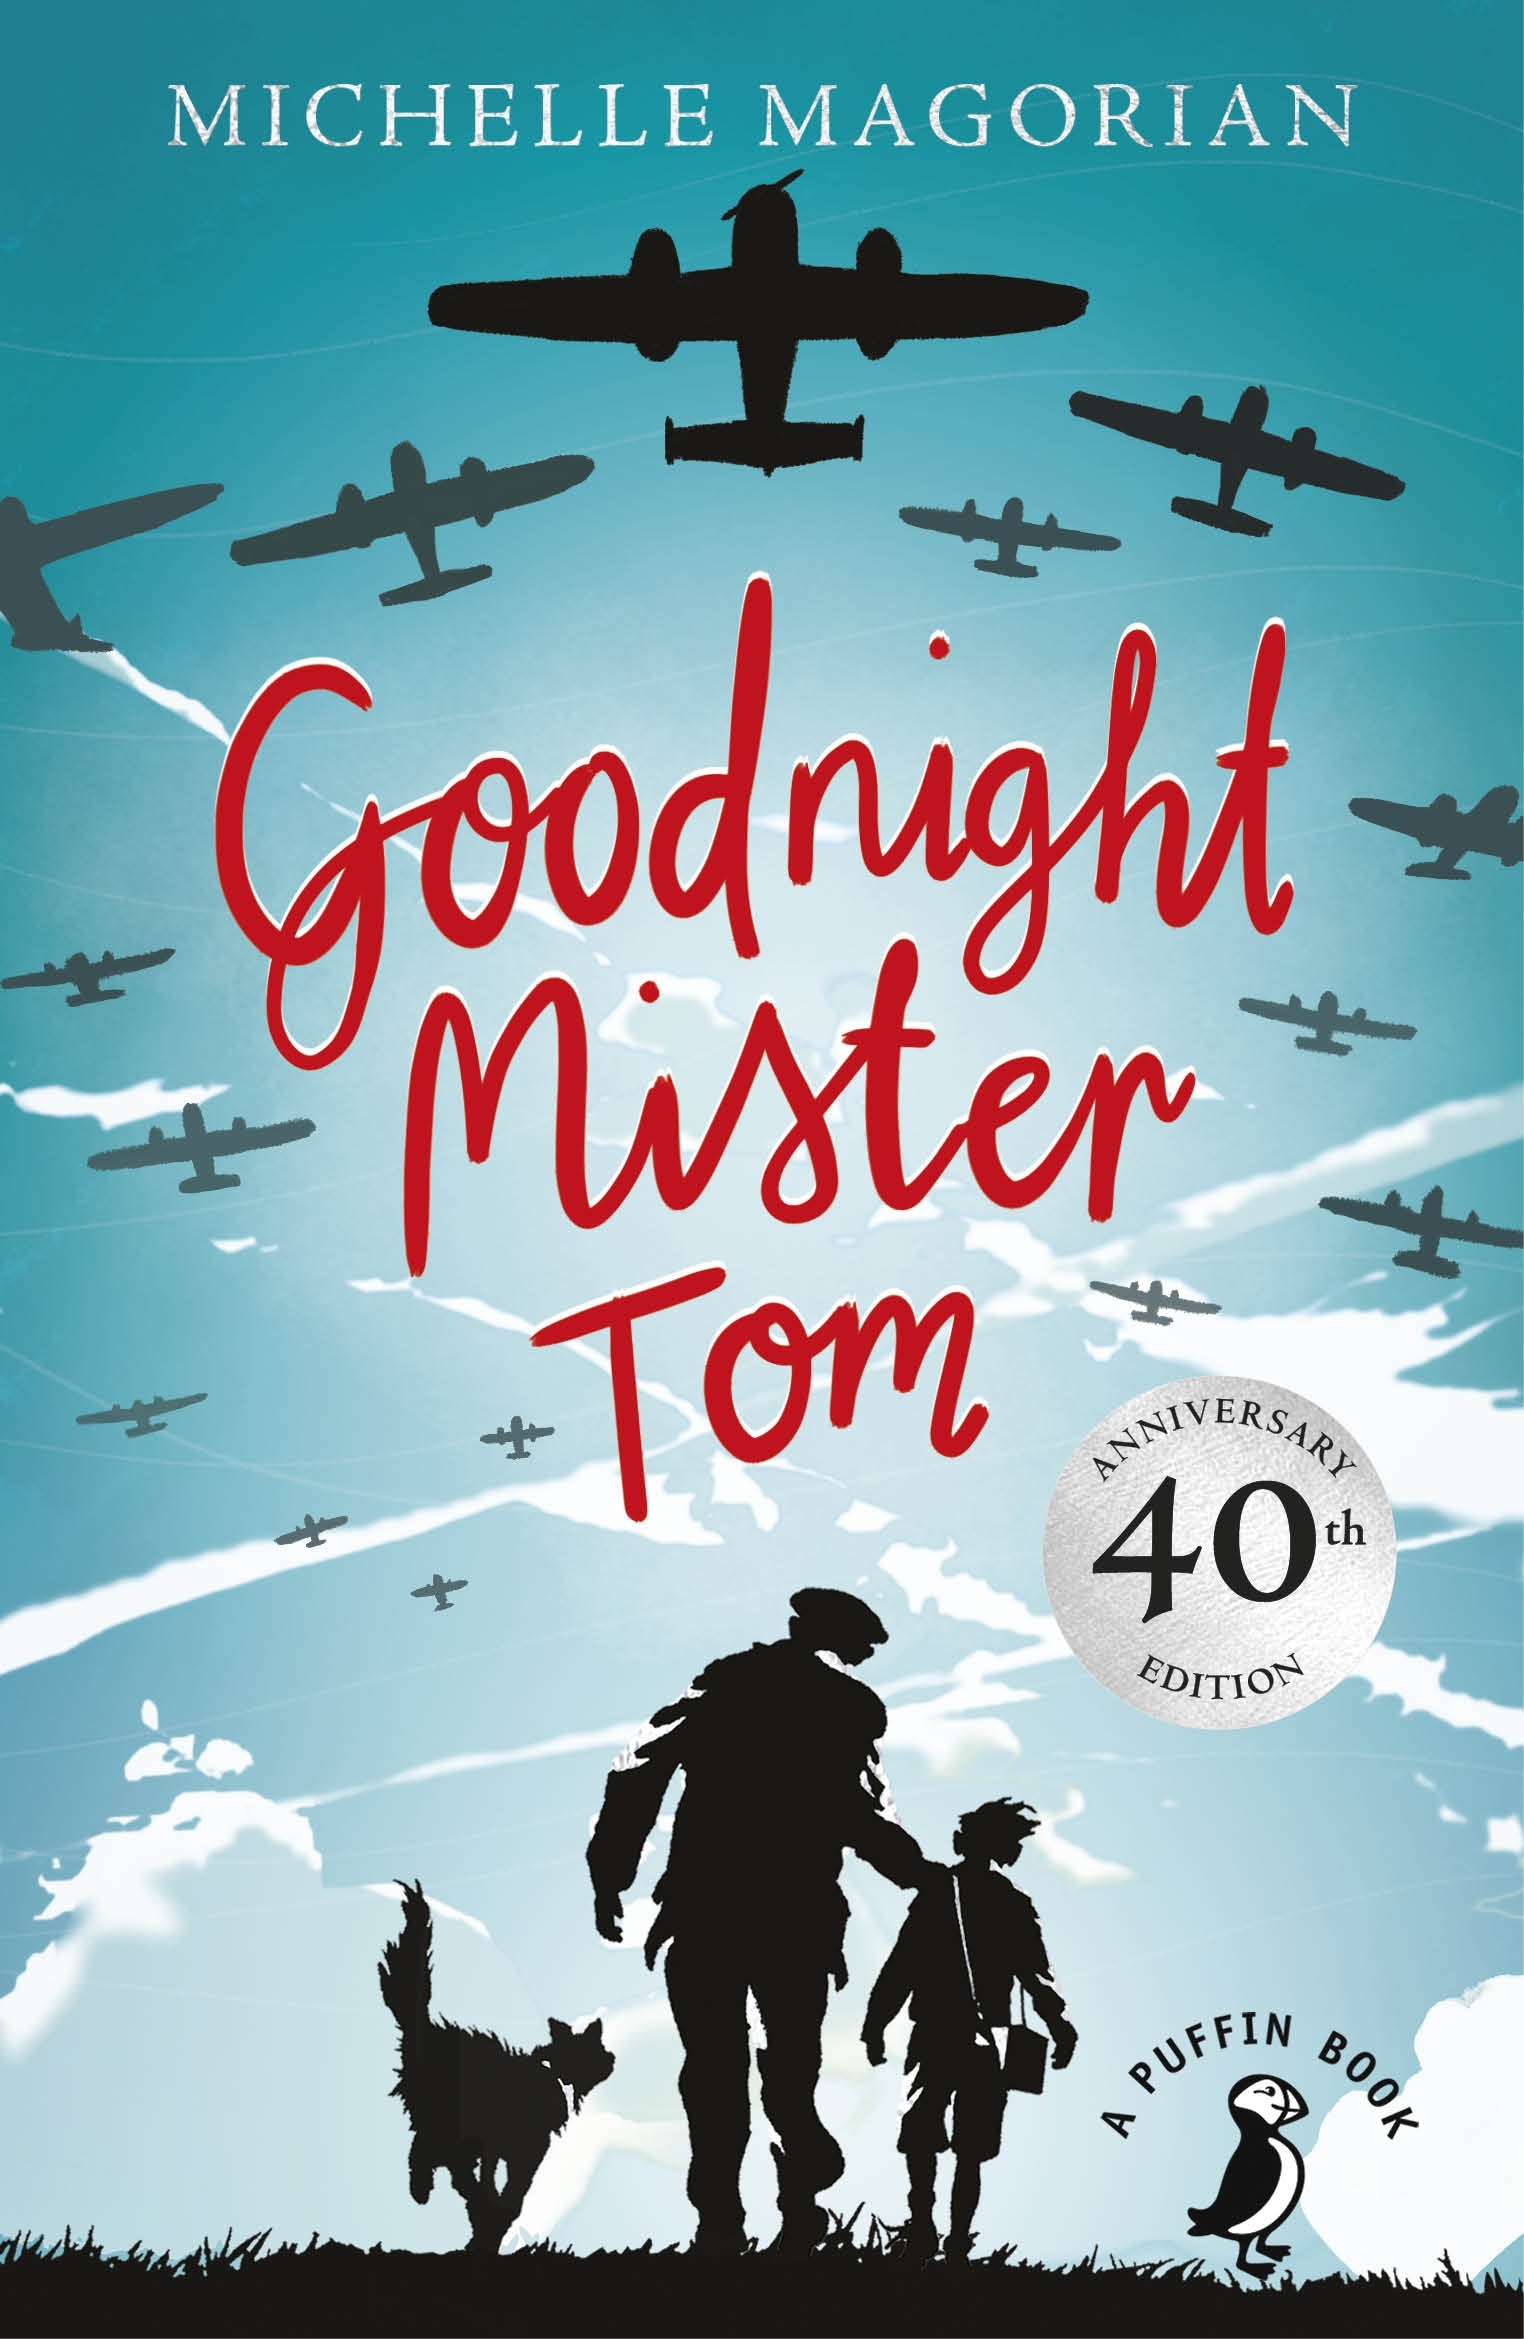 Book “Goodnight Mister Tom” by Michelle Magorian — July 3, 2014